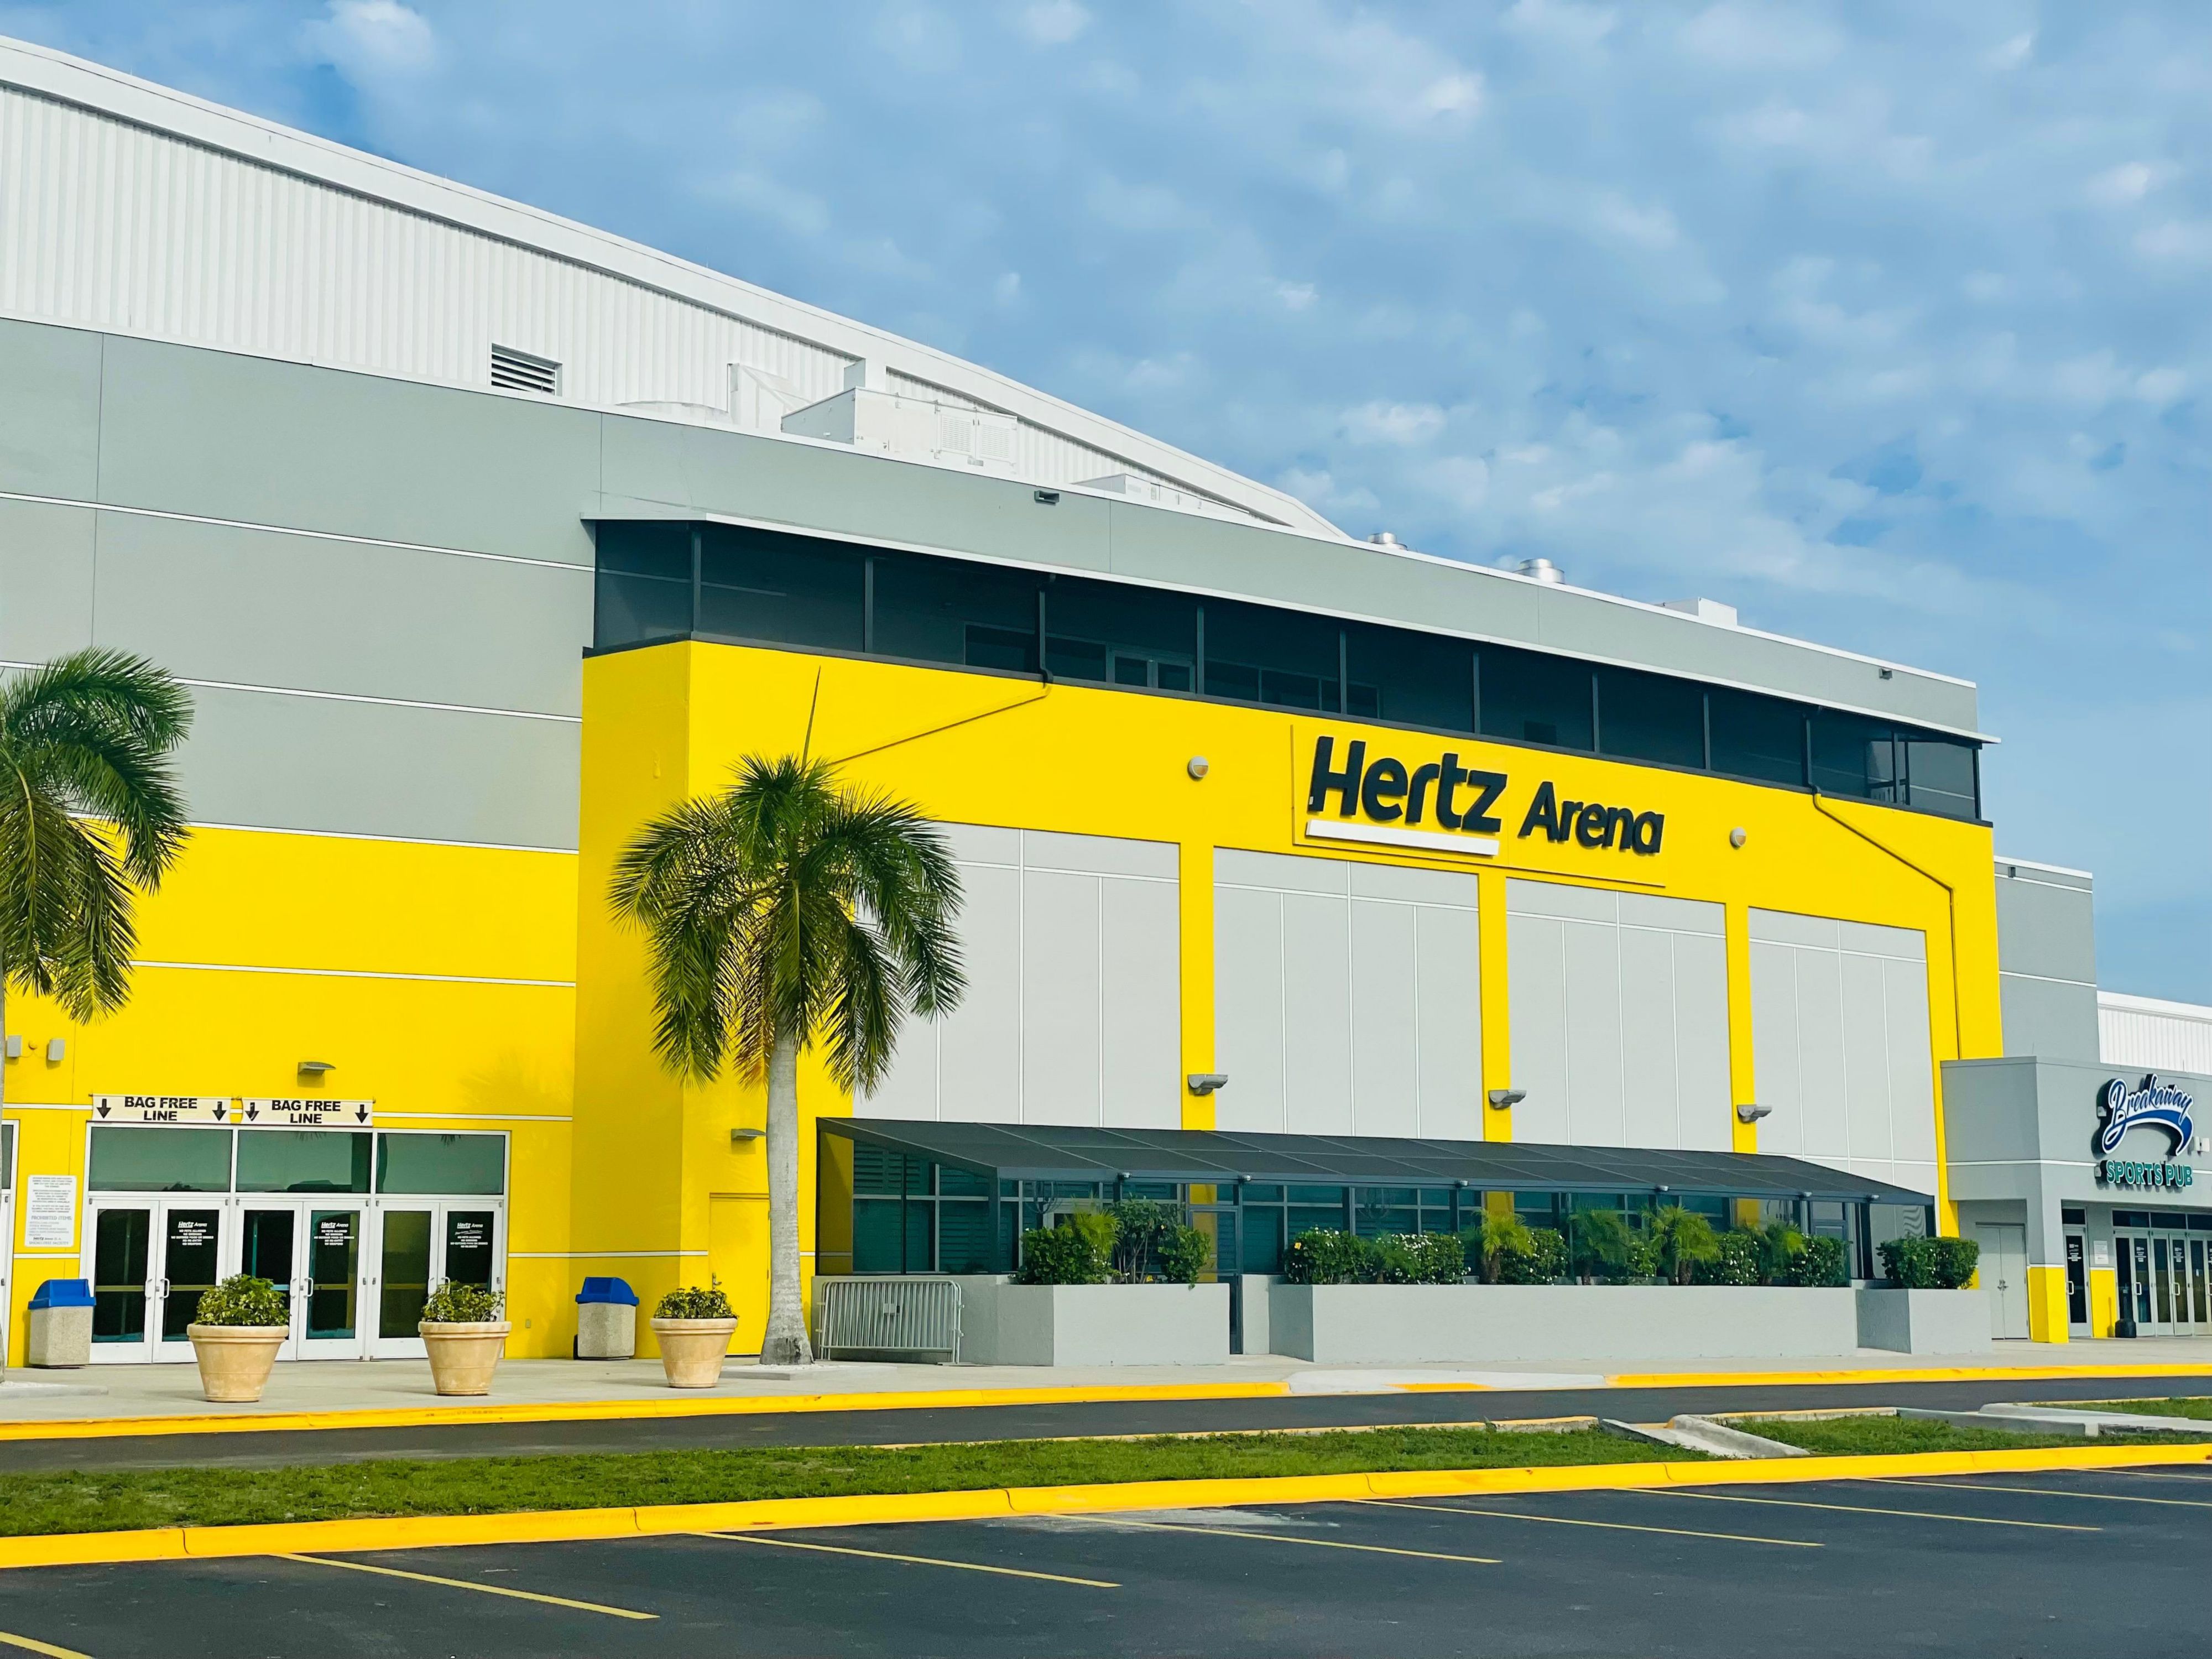 Hertz Arena, located only 4 miles from the hotel, is the home of the Florida Everblades ECHL hockey and a premier entertainment venue offering a wide variety of concerts, shows, graduations, basketball tournaments and more.